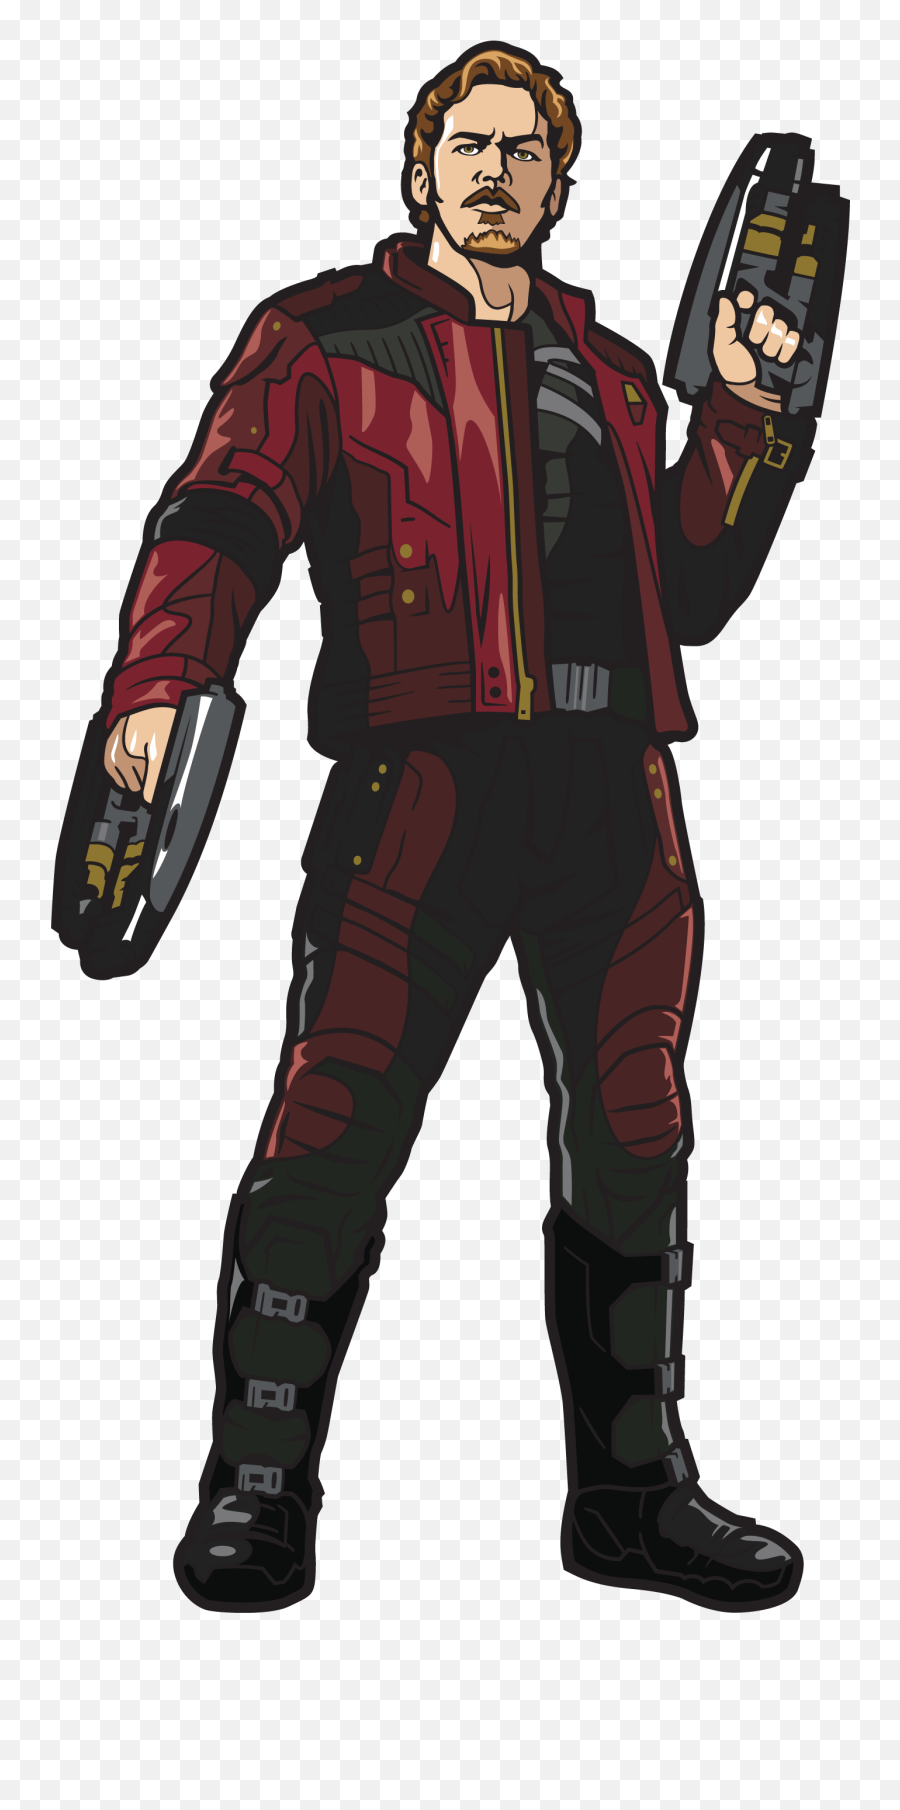 Avengers Infinity War Star Lord Png Transparent Cartoon - Infinity War Lego Star Lord Emoji,Avengers Infinity War Logo